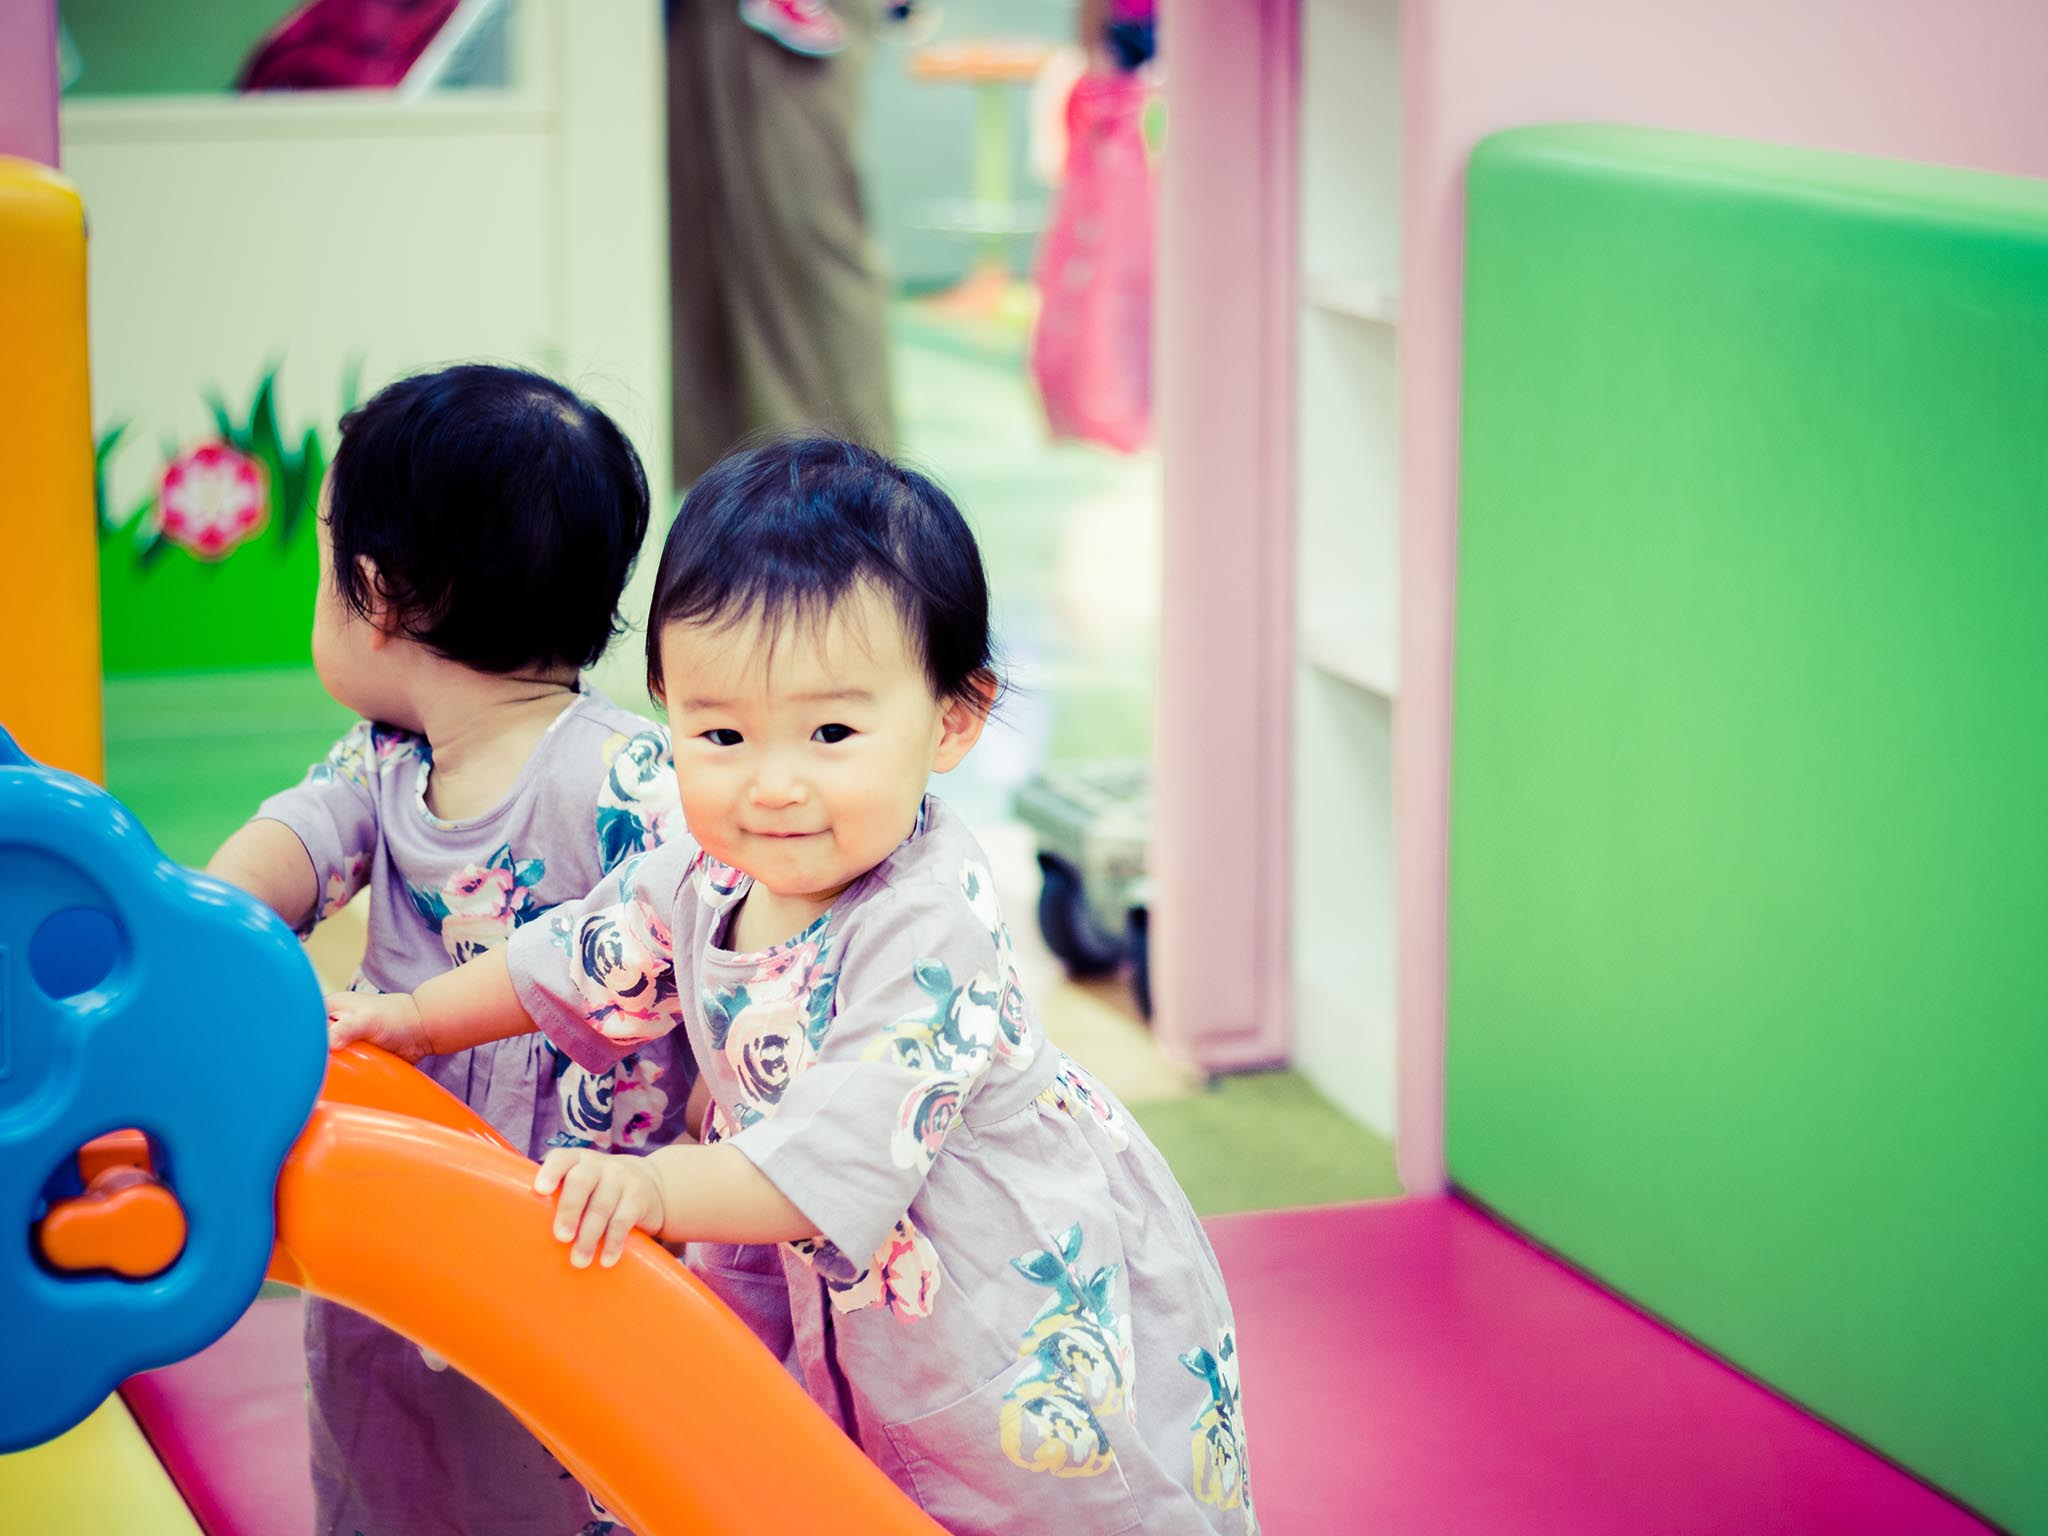 Mothers have to hunt desperately for a daycare place for their toddlers